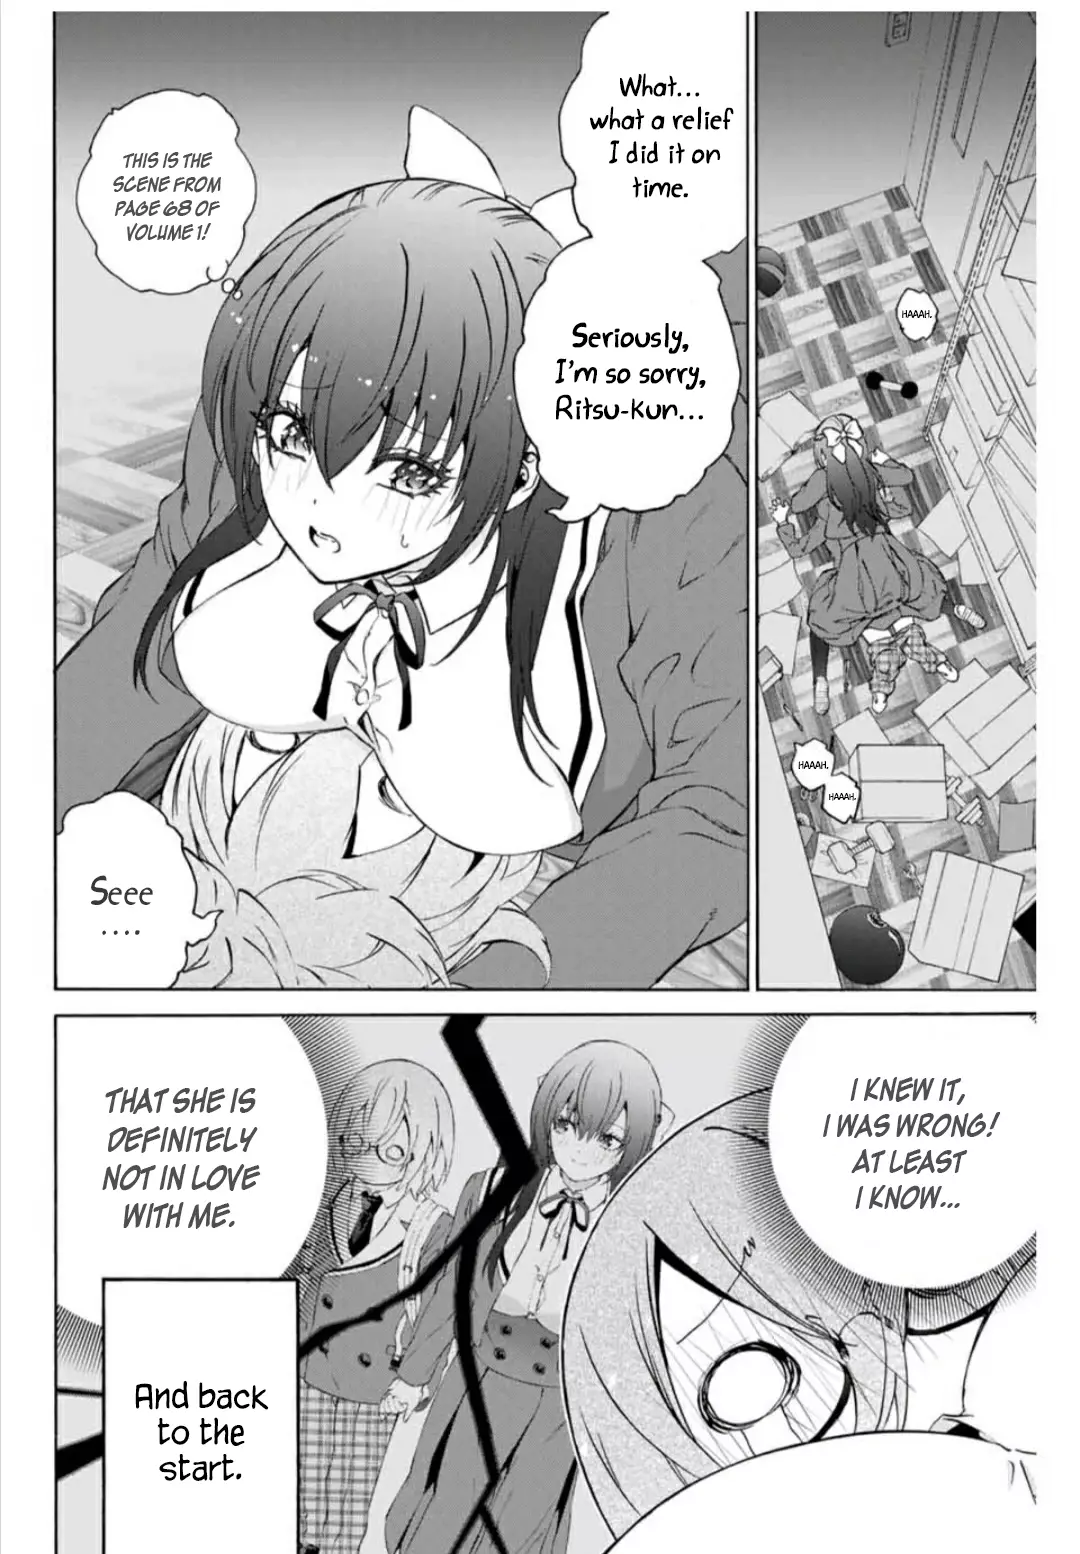 My Senpai Is After My Life - 19 page 9-13cba8f1